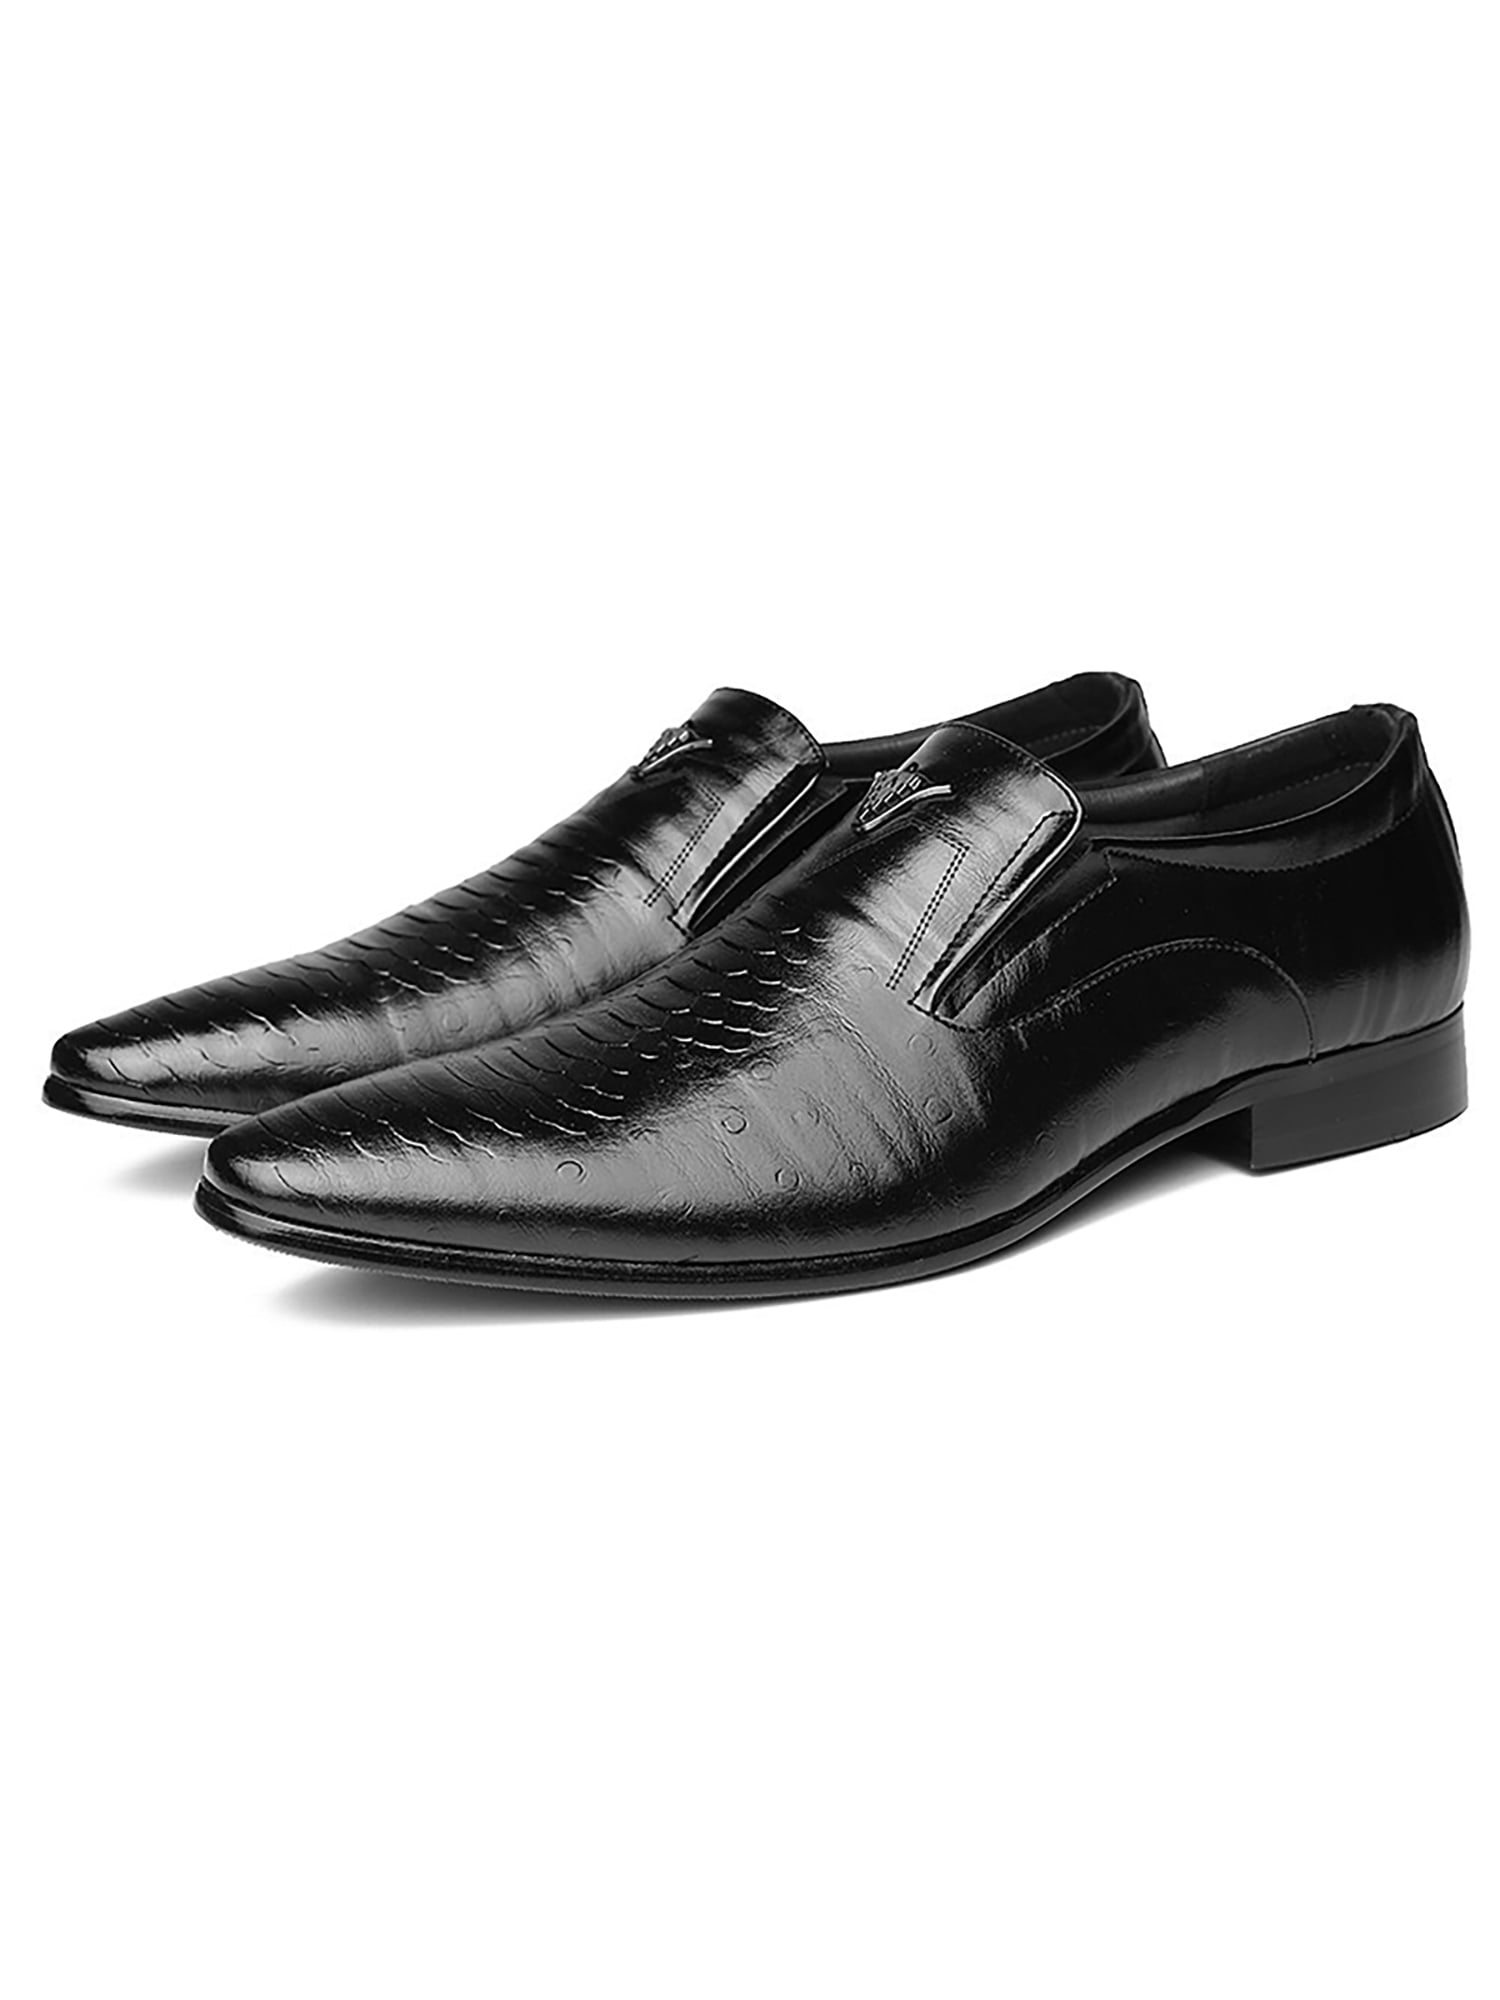 SIMANLAN Mens Loafers Slip On Dress Shoes Square Toe Oxfords Driving ...